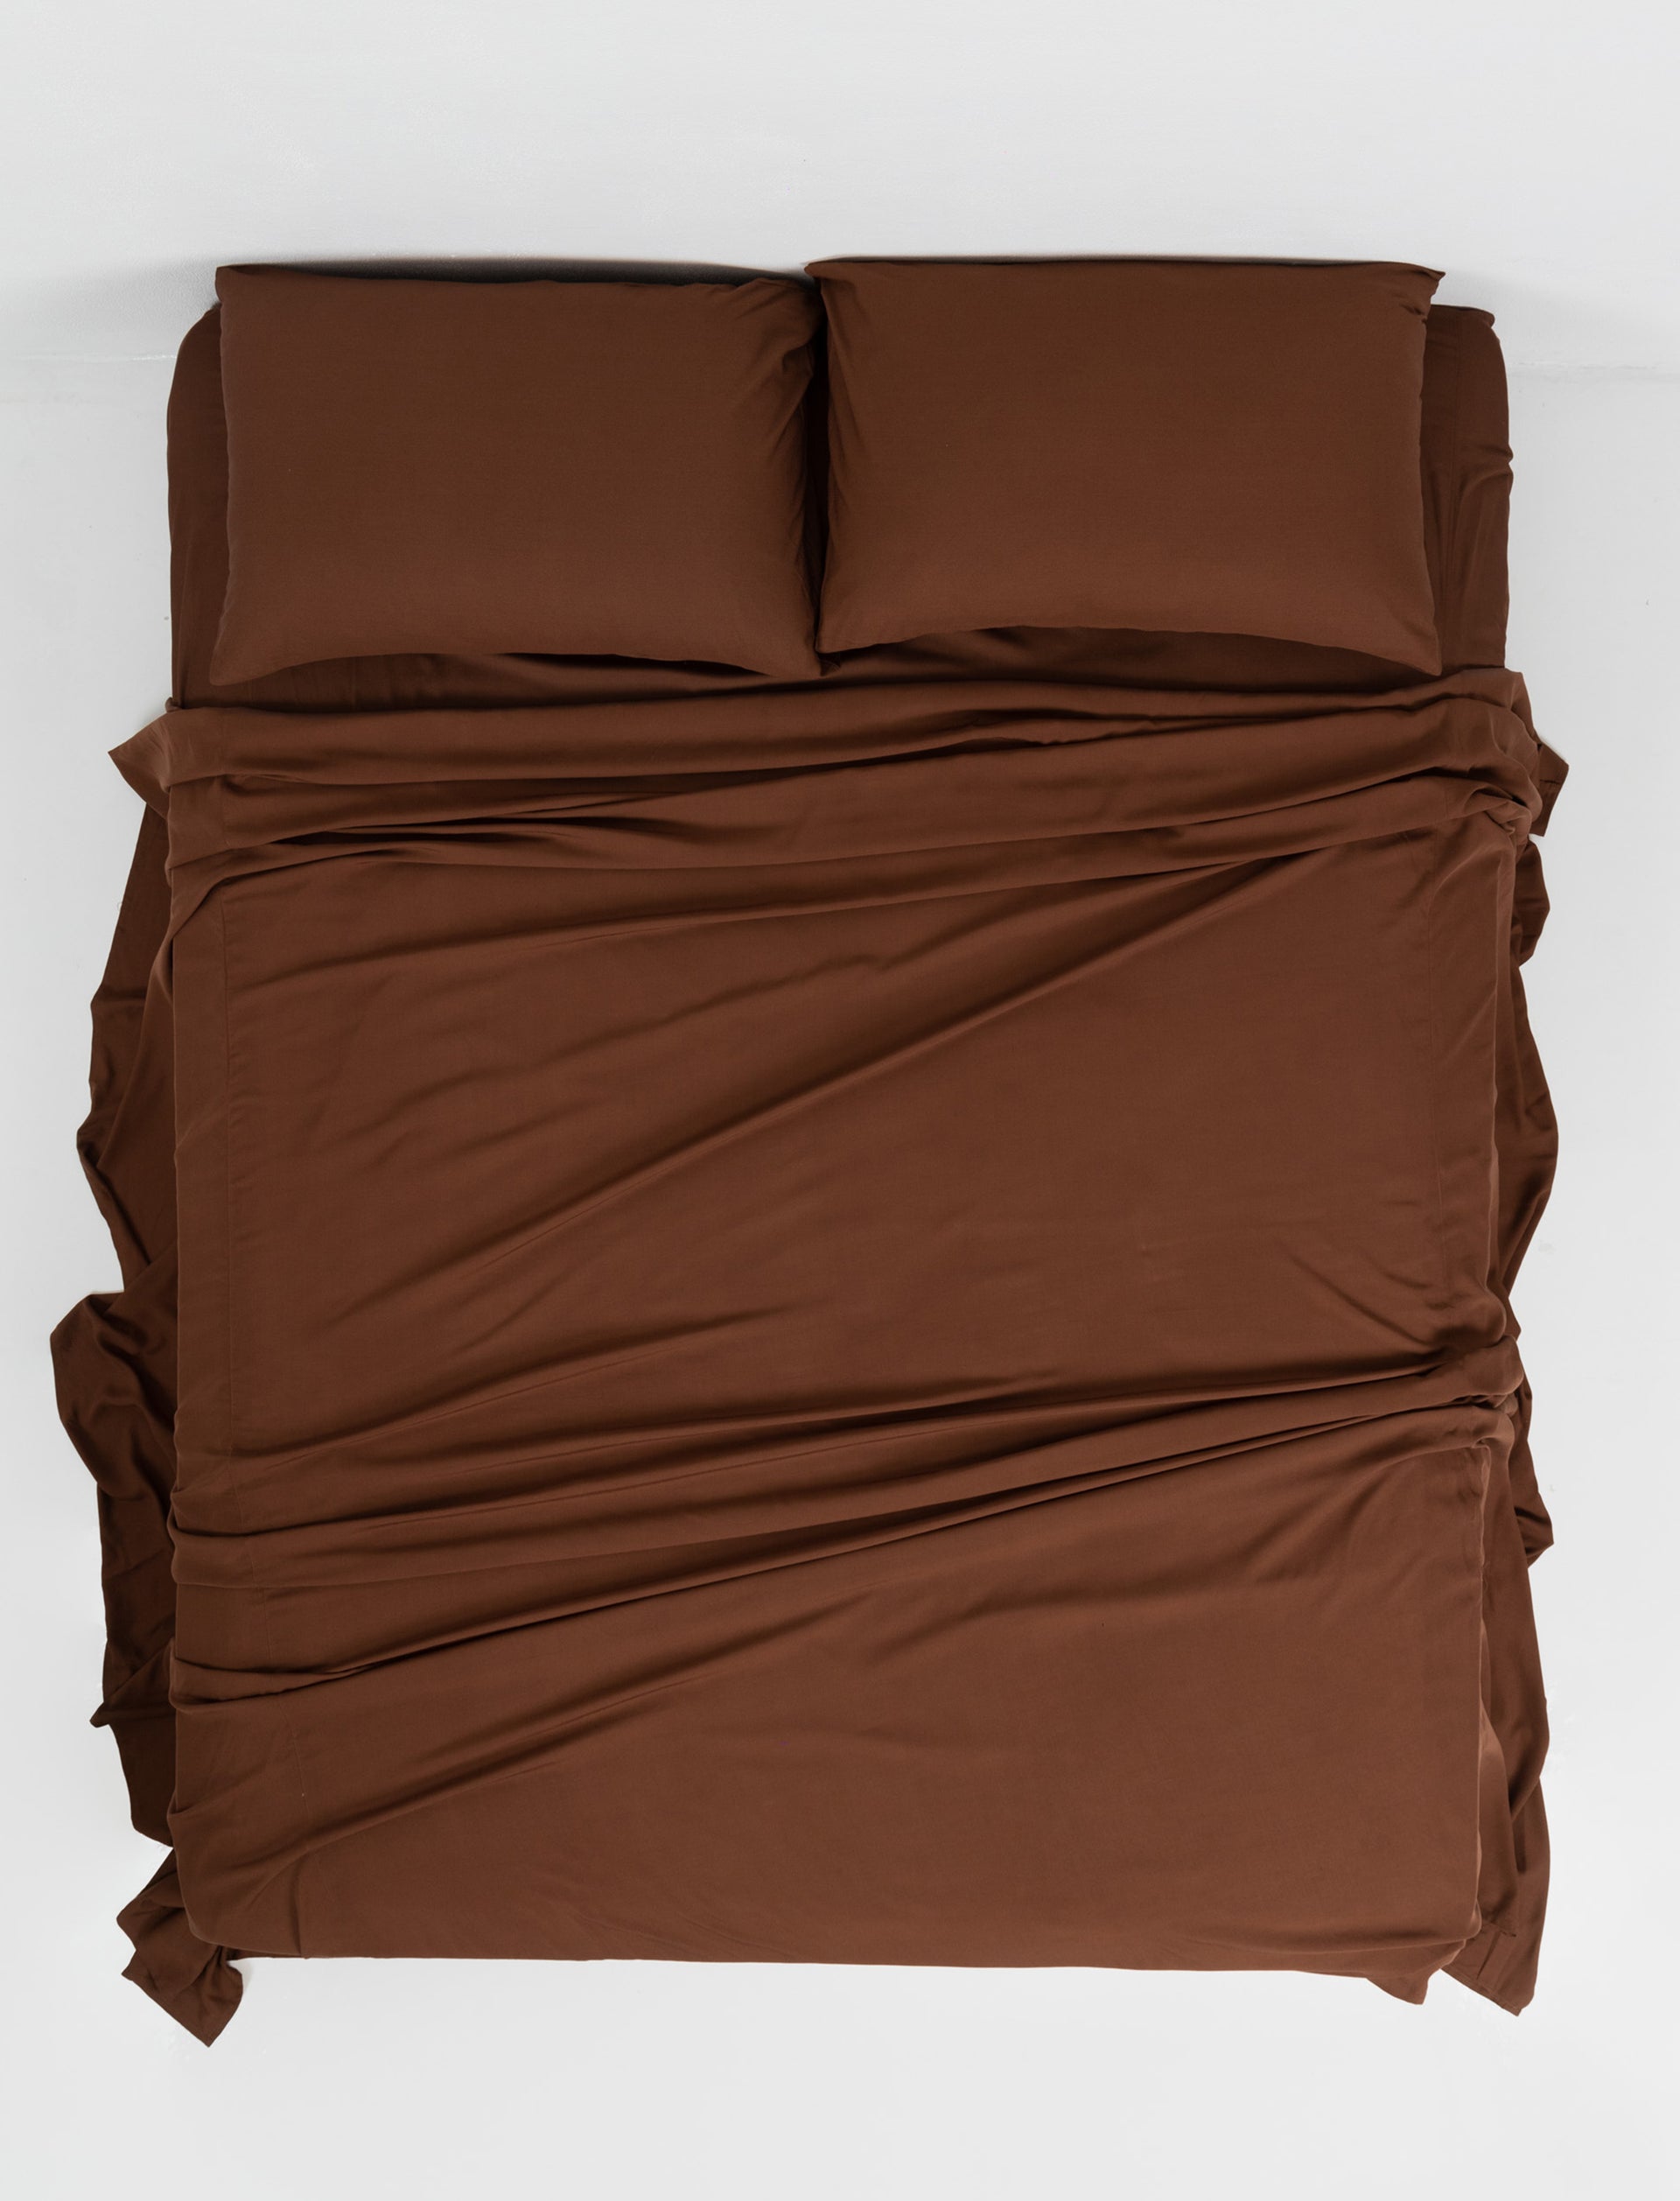 Choc Fitted Sheet